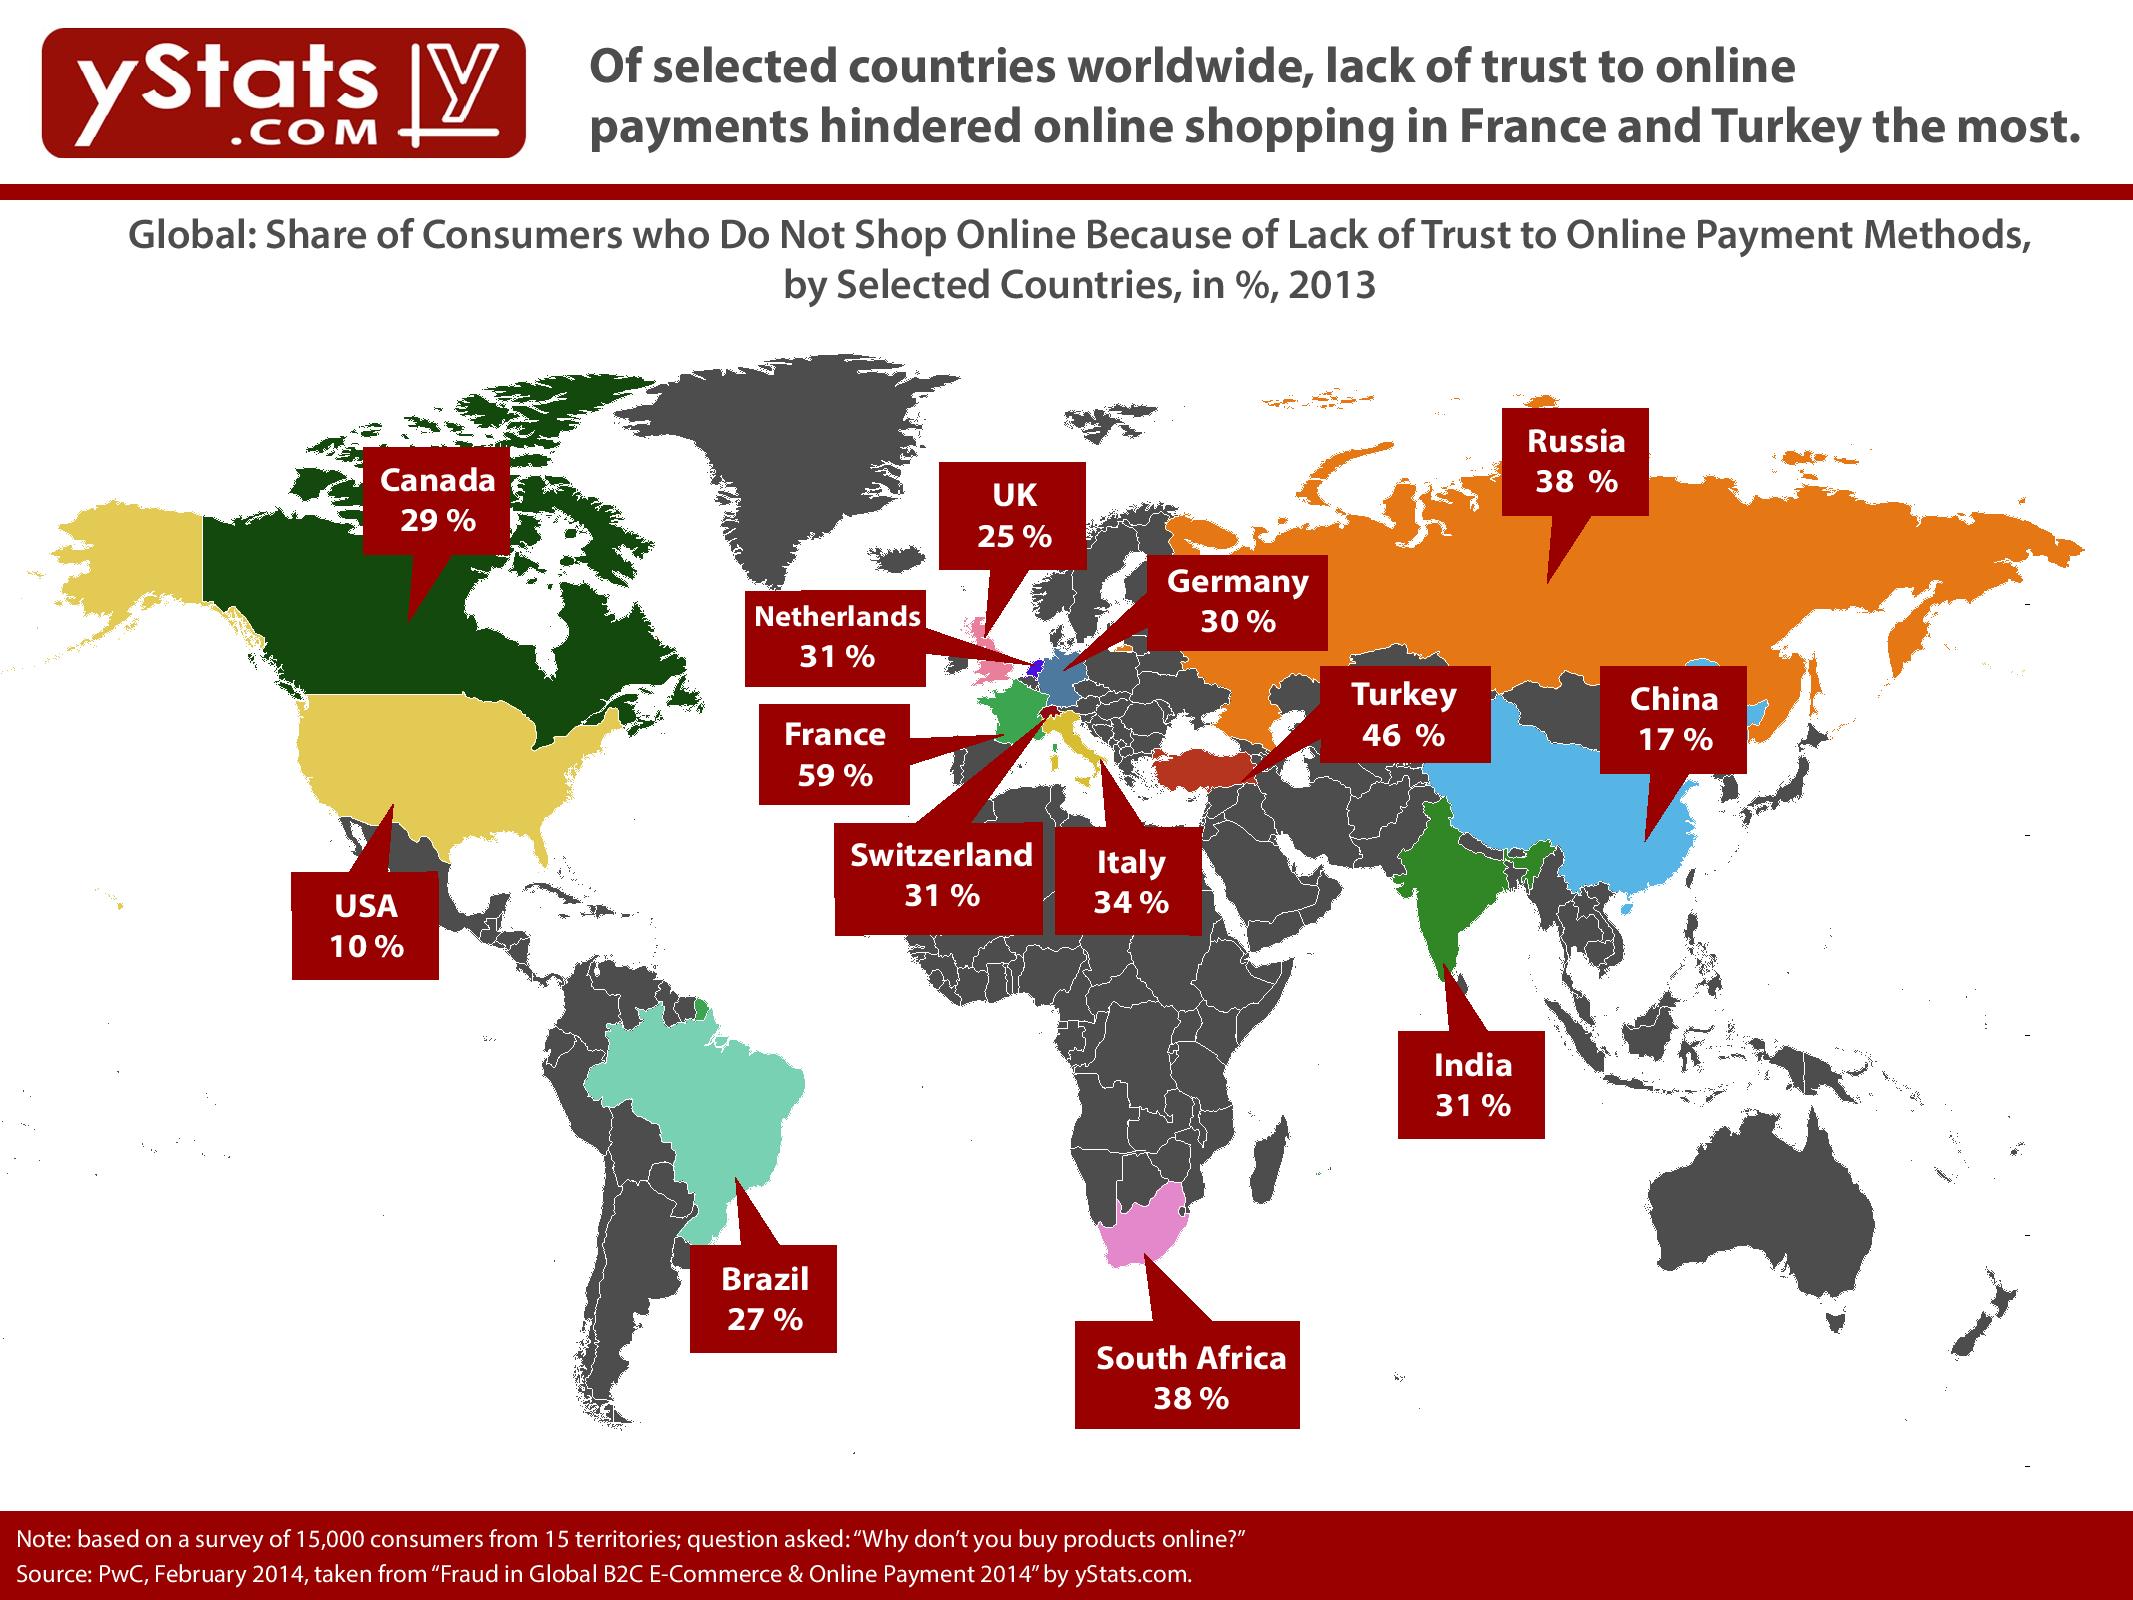 yStats.com Fraud in Global B2C E-Commerce & Online Payment 2014 Infographic